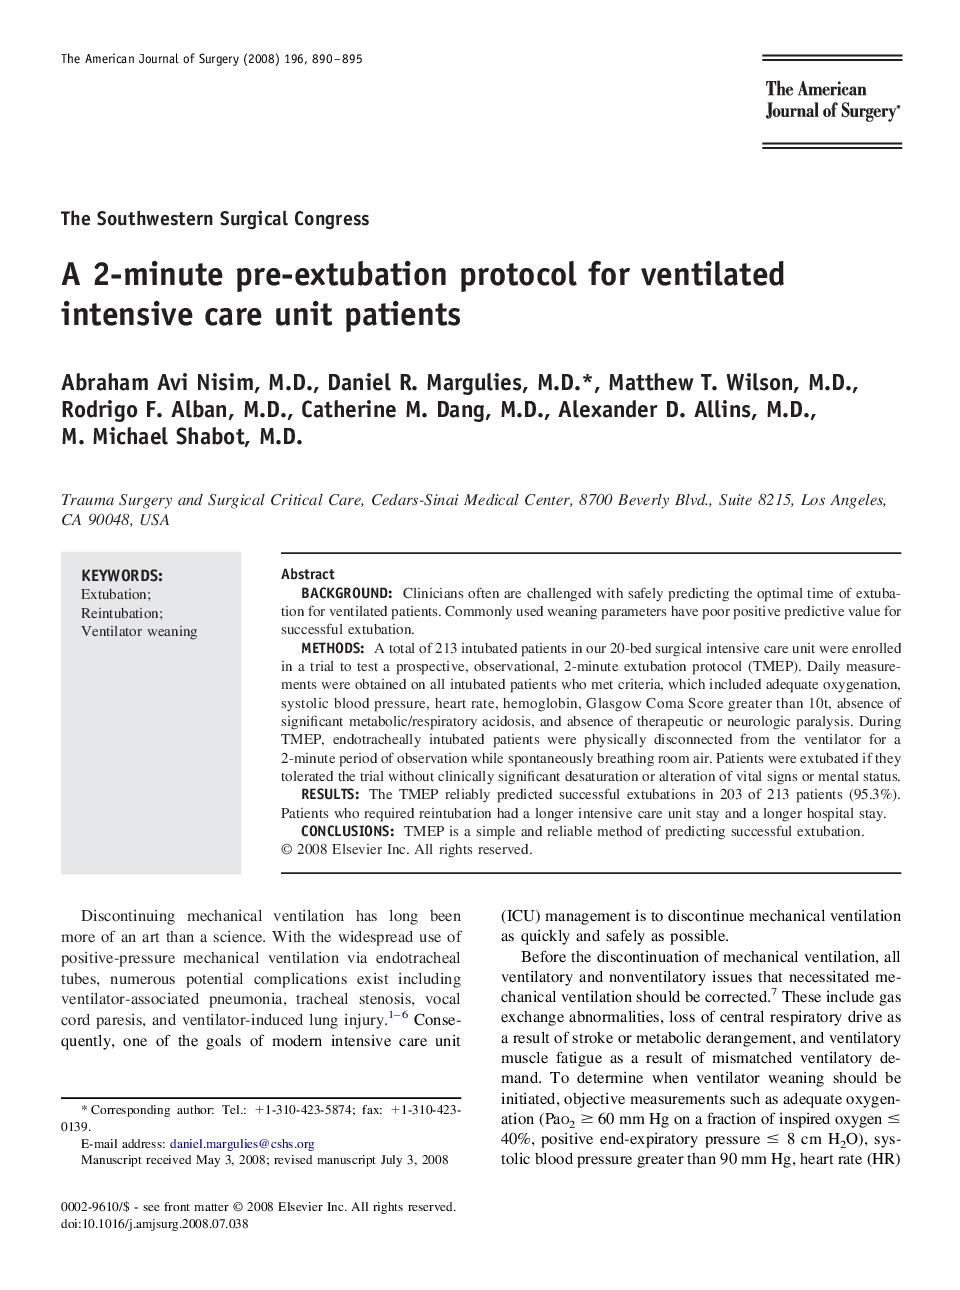 A 2-minute pre-extubation protocol for ventilated intensive care unit patients